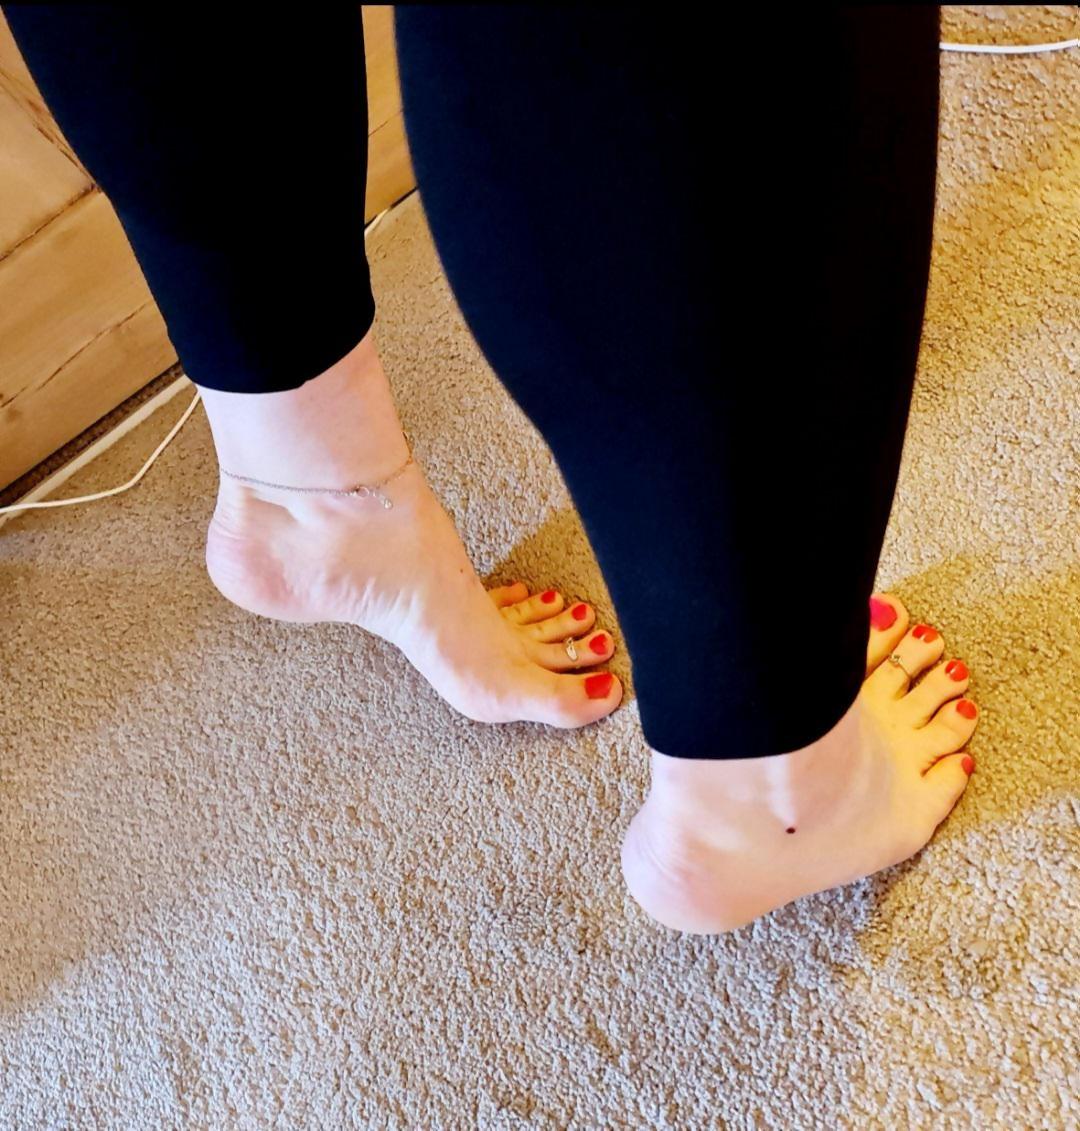 Swap my feet for your older guy cocks